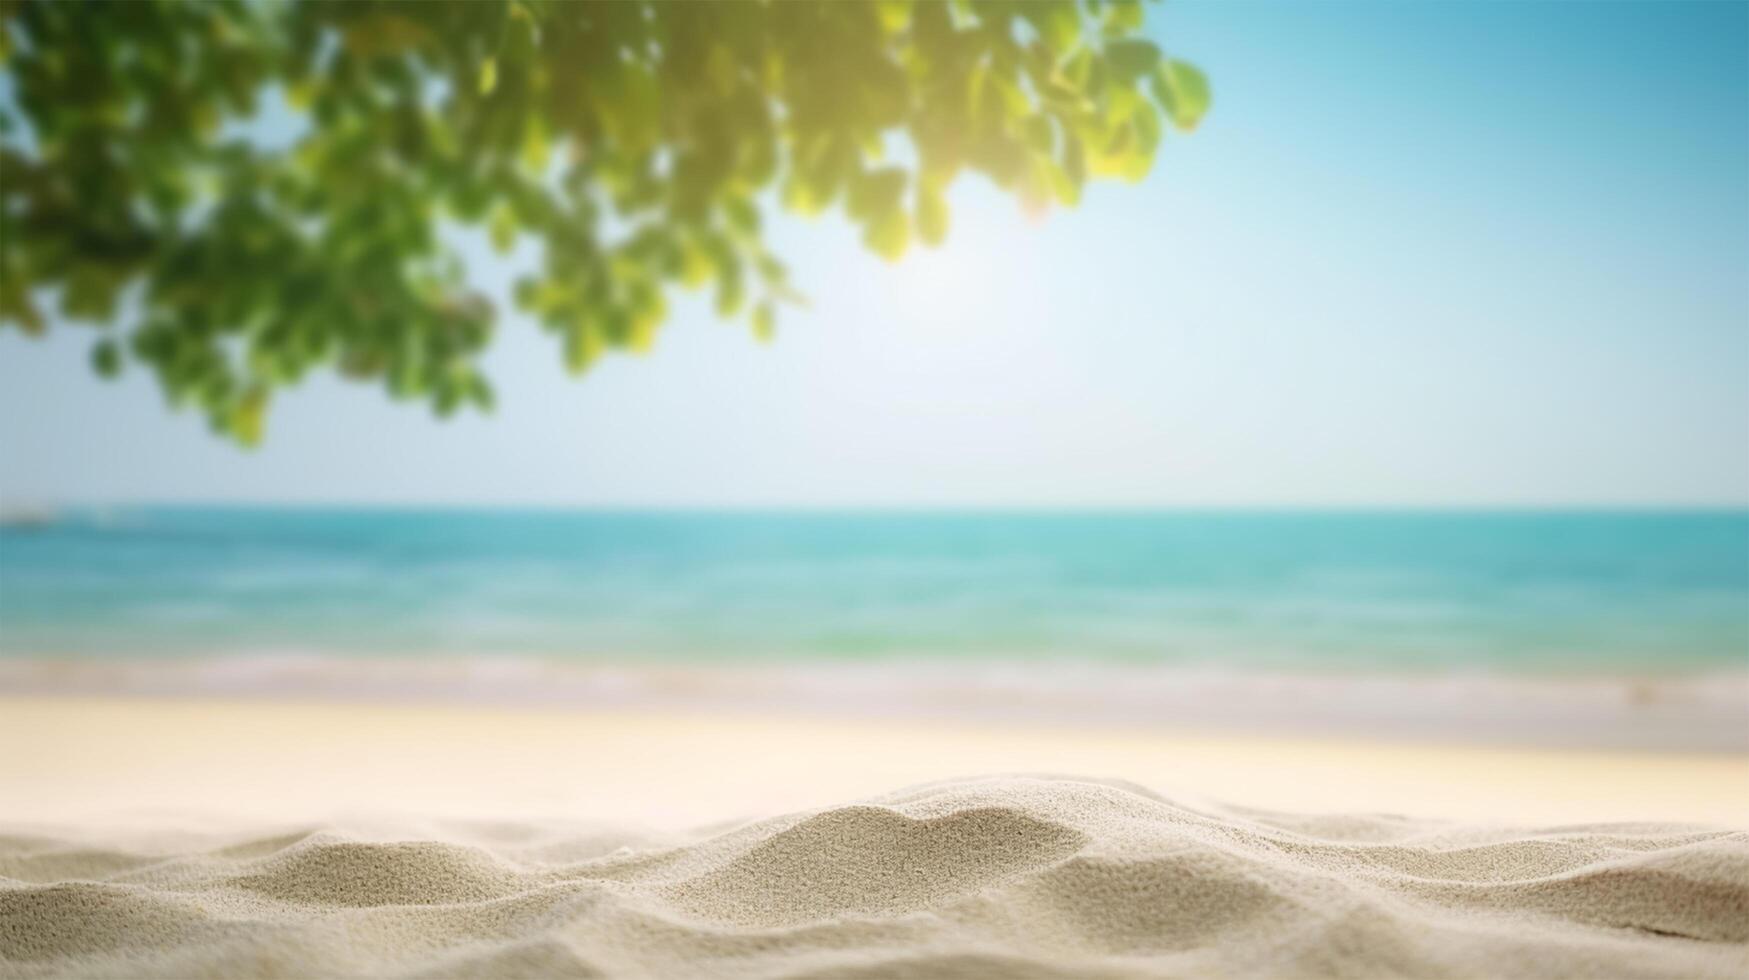 Beautiful Summer exotic sandy beach with blurred tree and sea on background photo